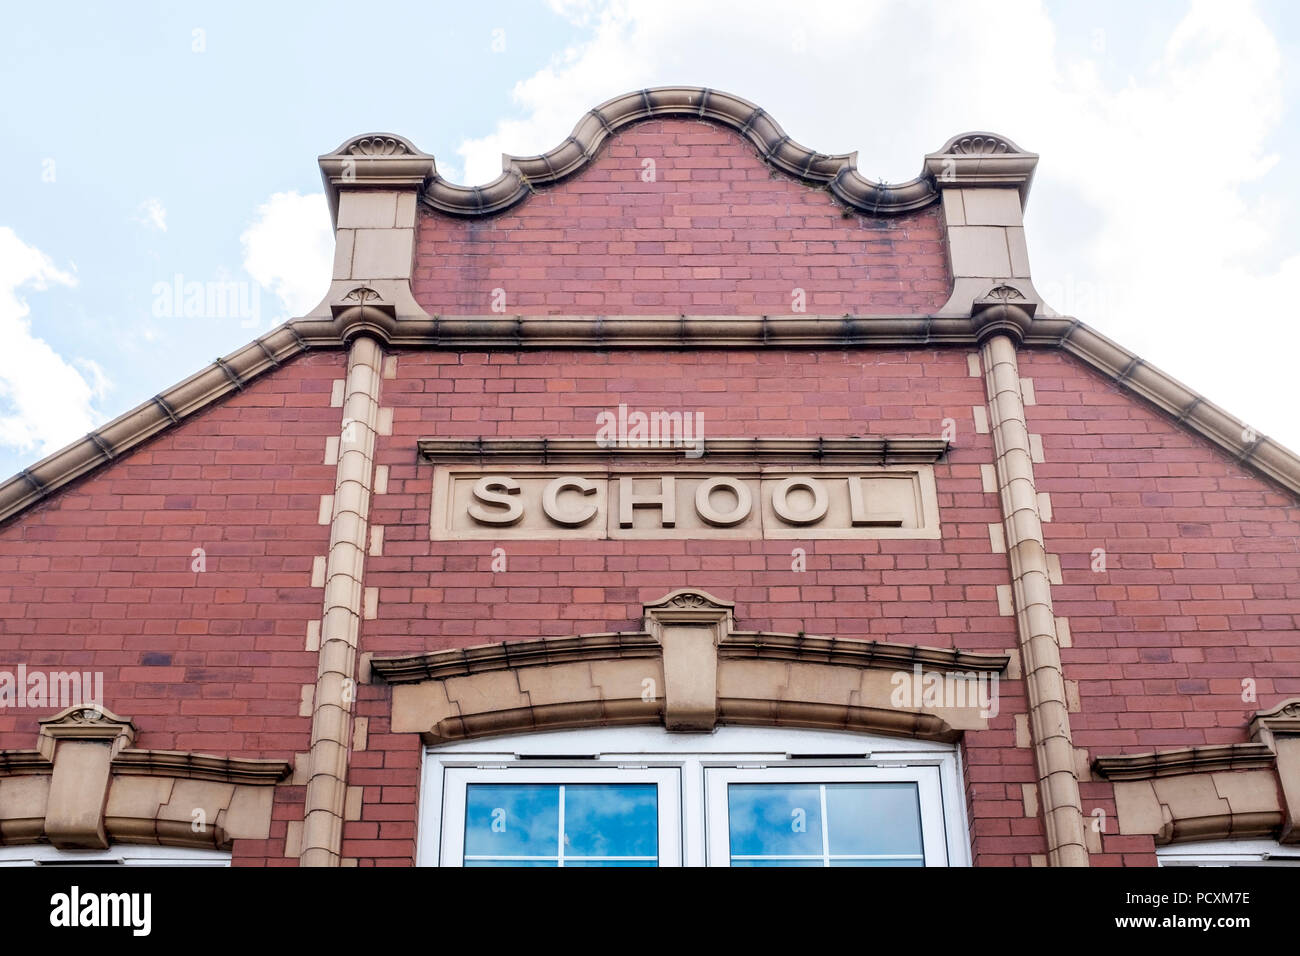 Detail of Council School sign in Middlewich Cheshire UK Stock Photo